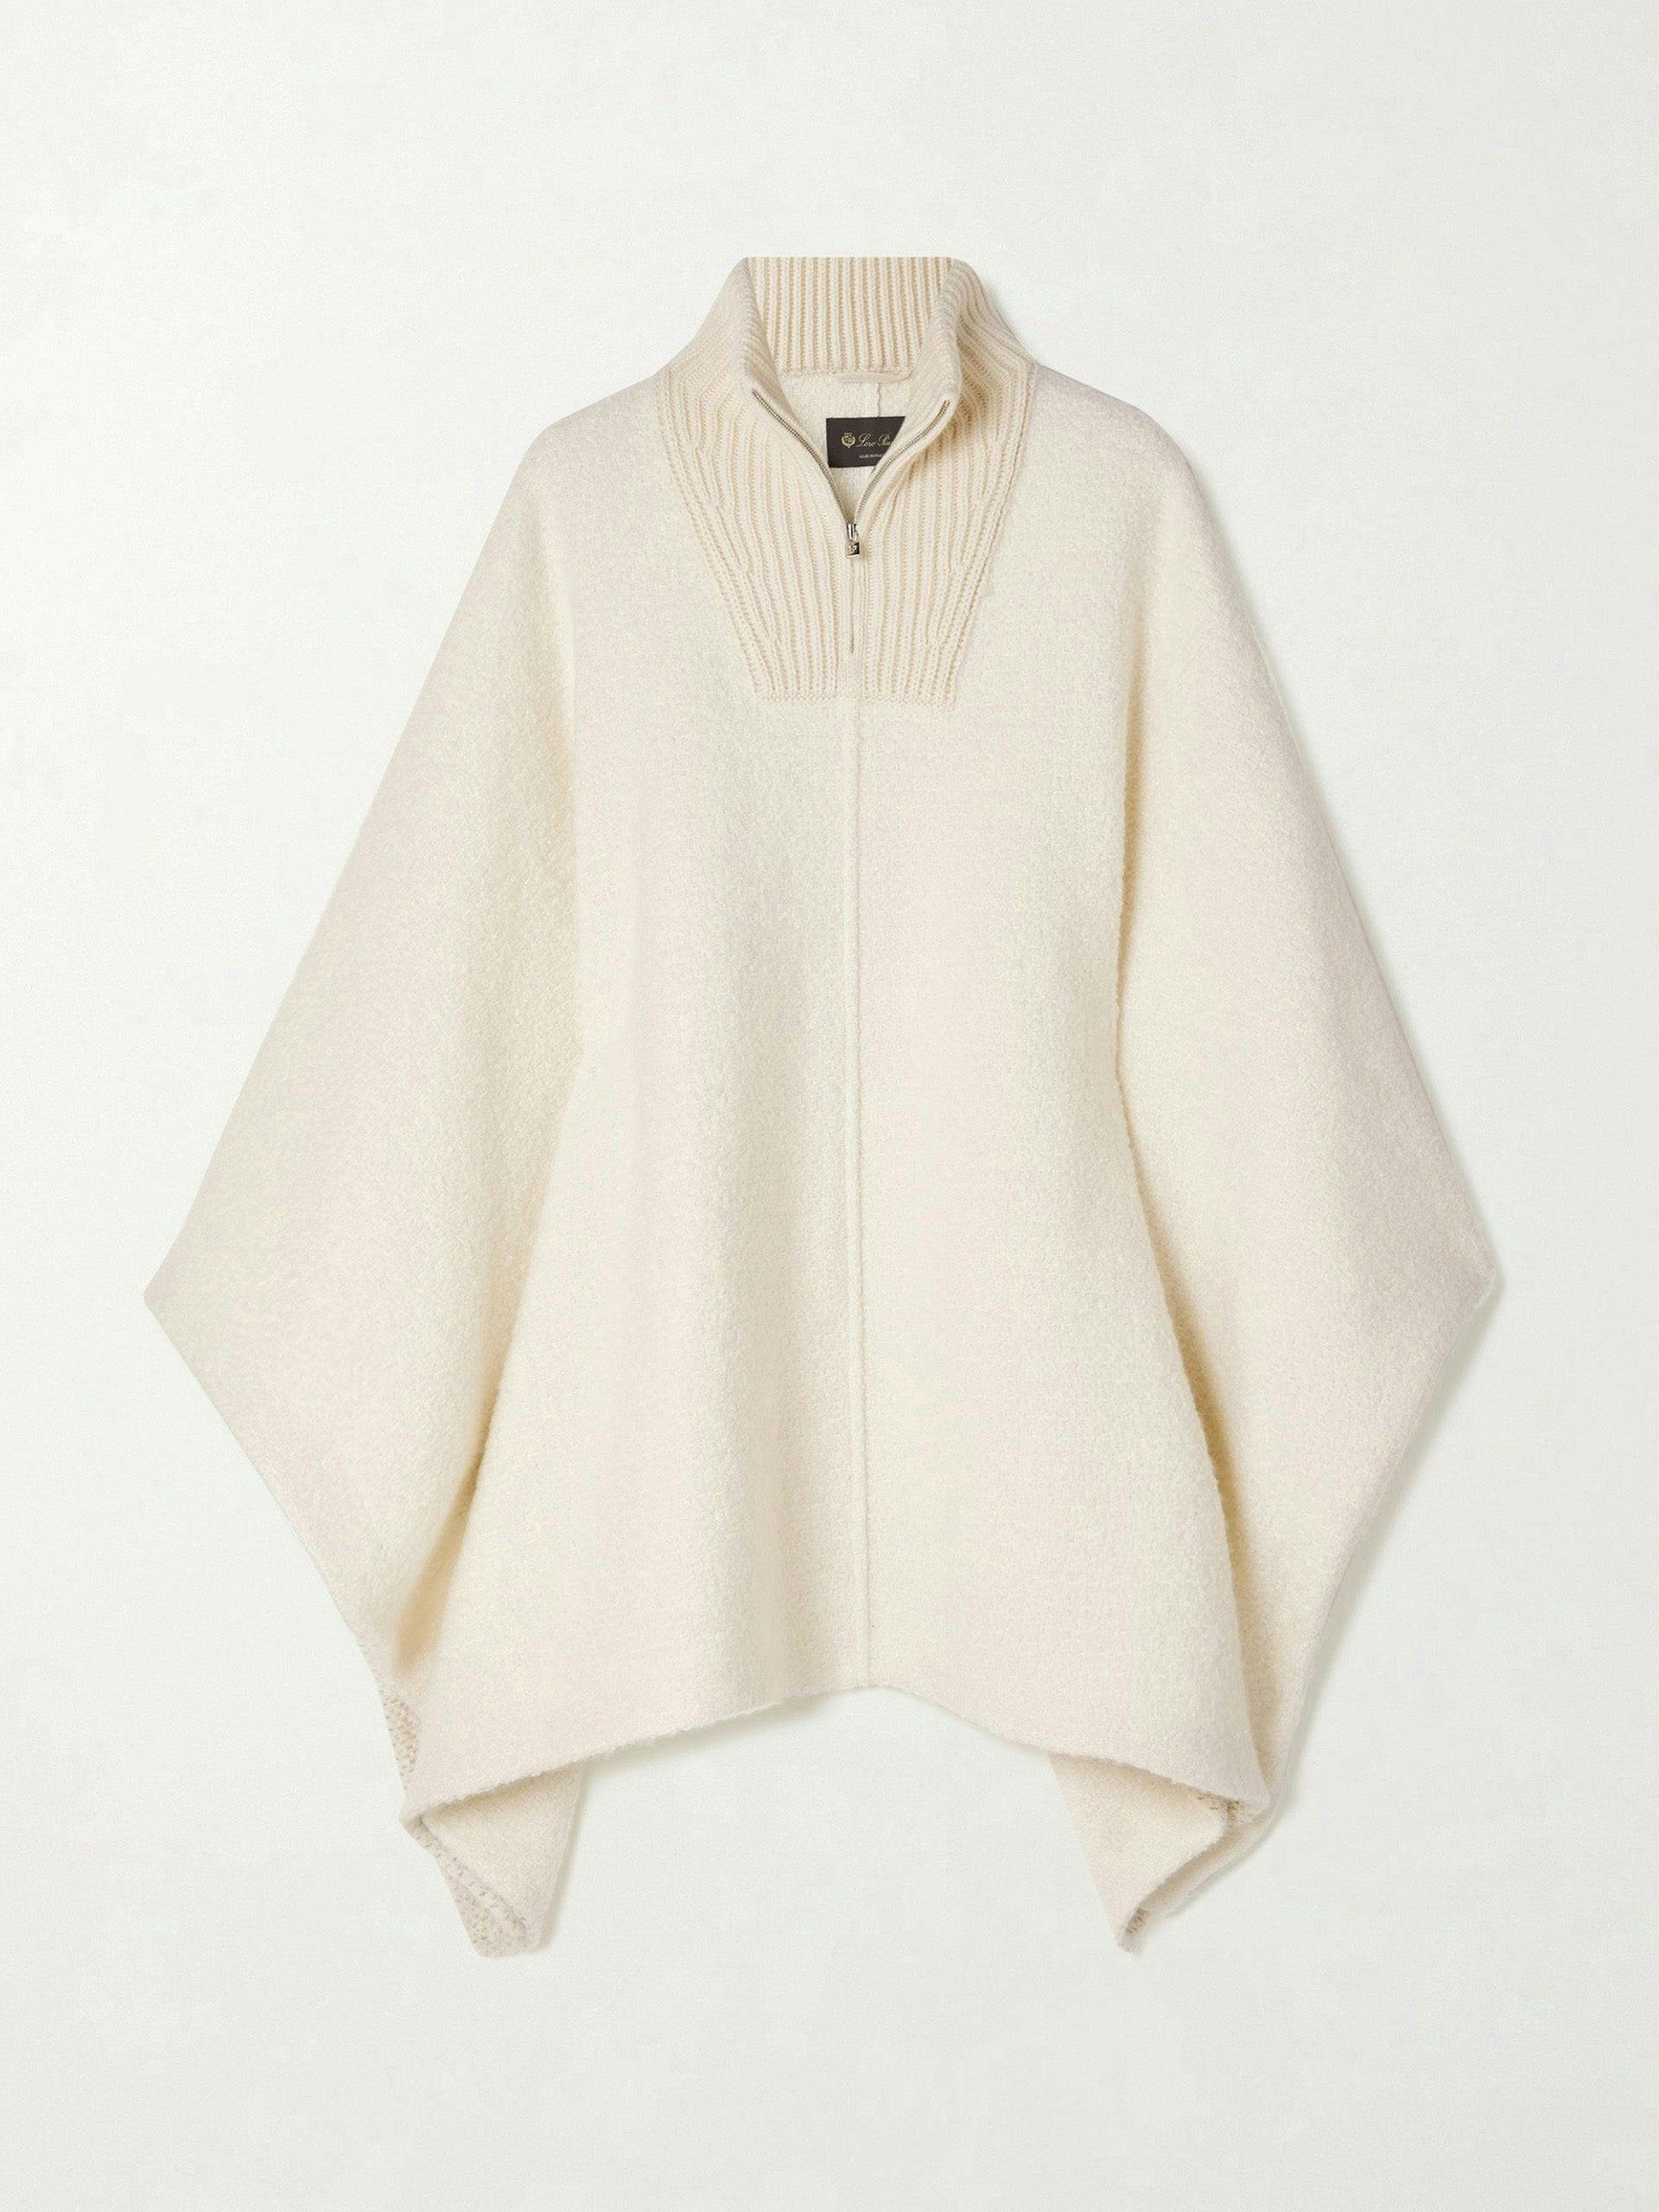 White cashmere and silk-blend turtleneck poncho